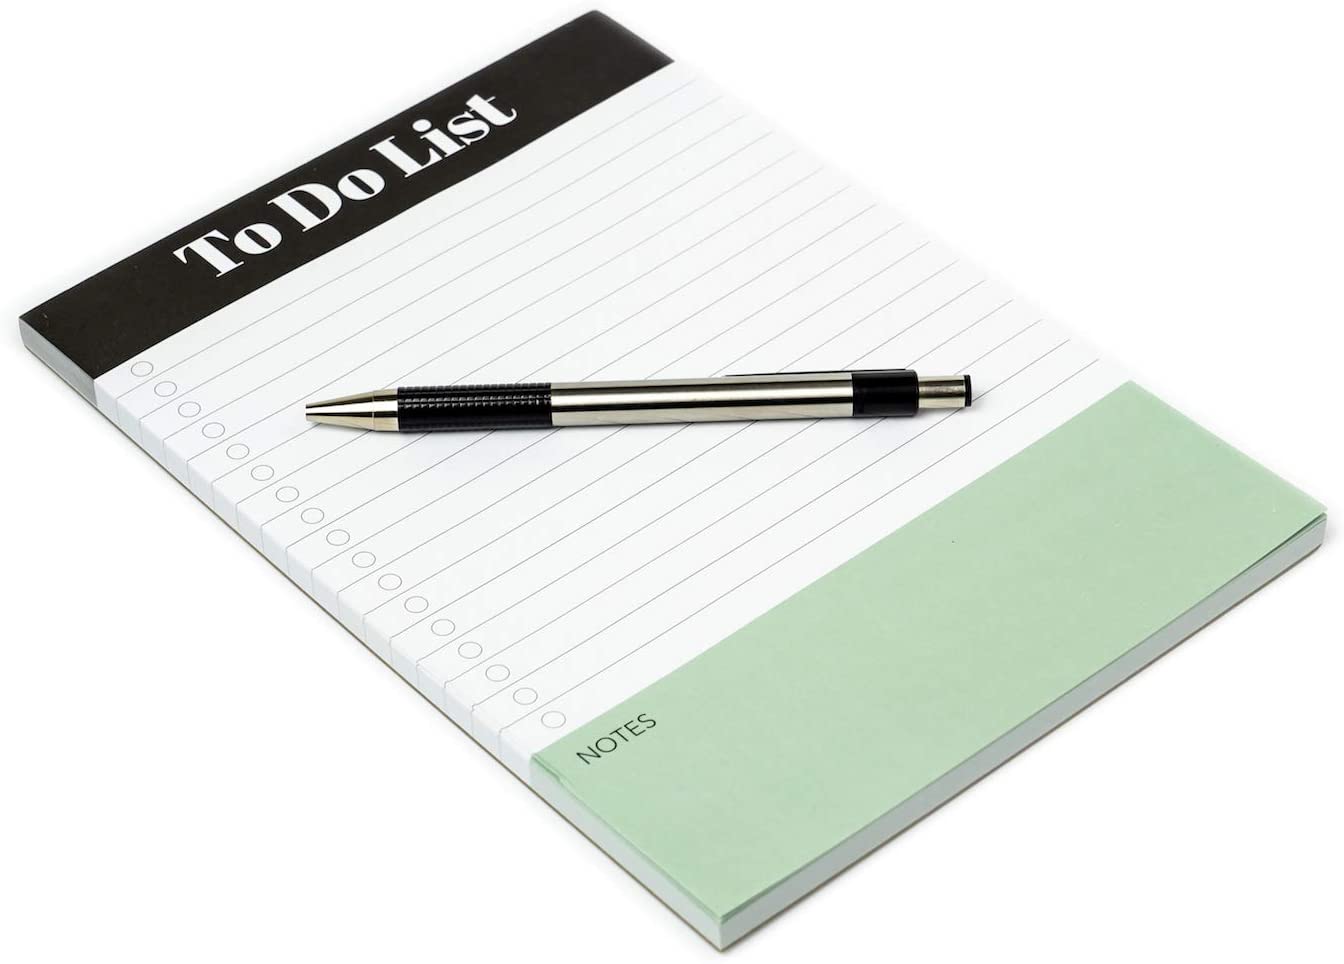 Costom Sticky Notes memo padundated Daily To Do List Notepad Planner Shopping List Checklist Customizable  Hot sale products